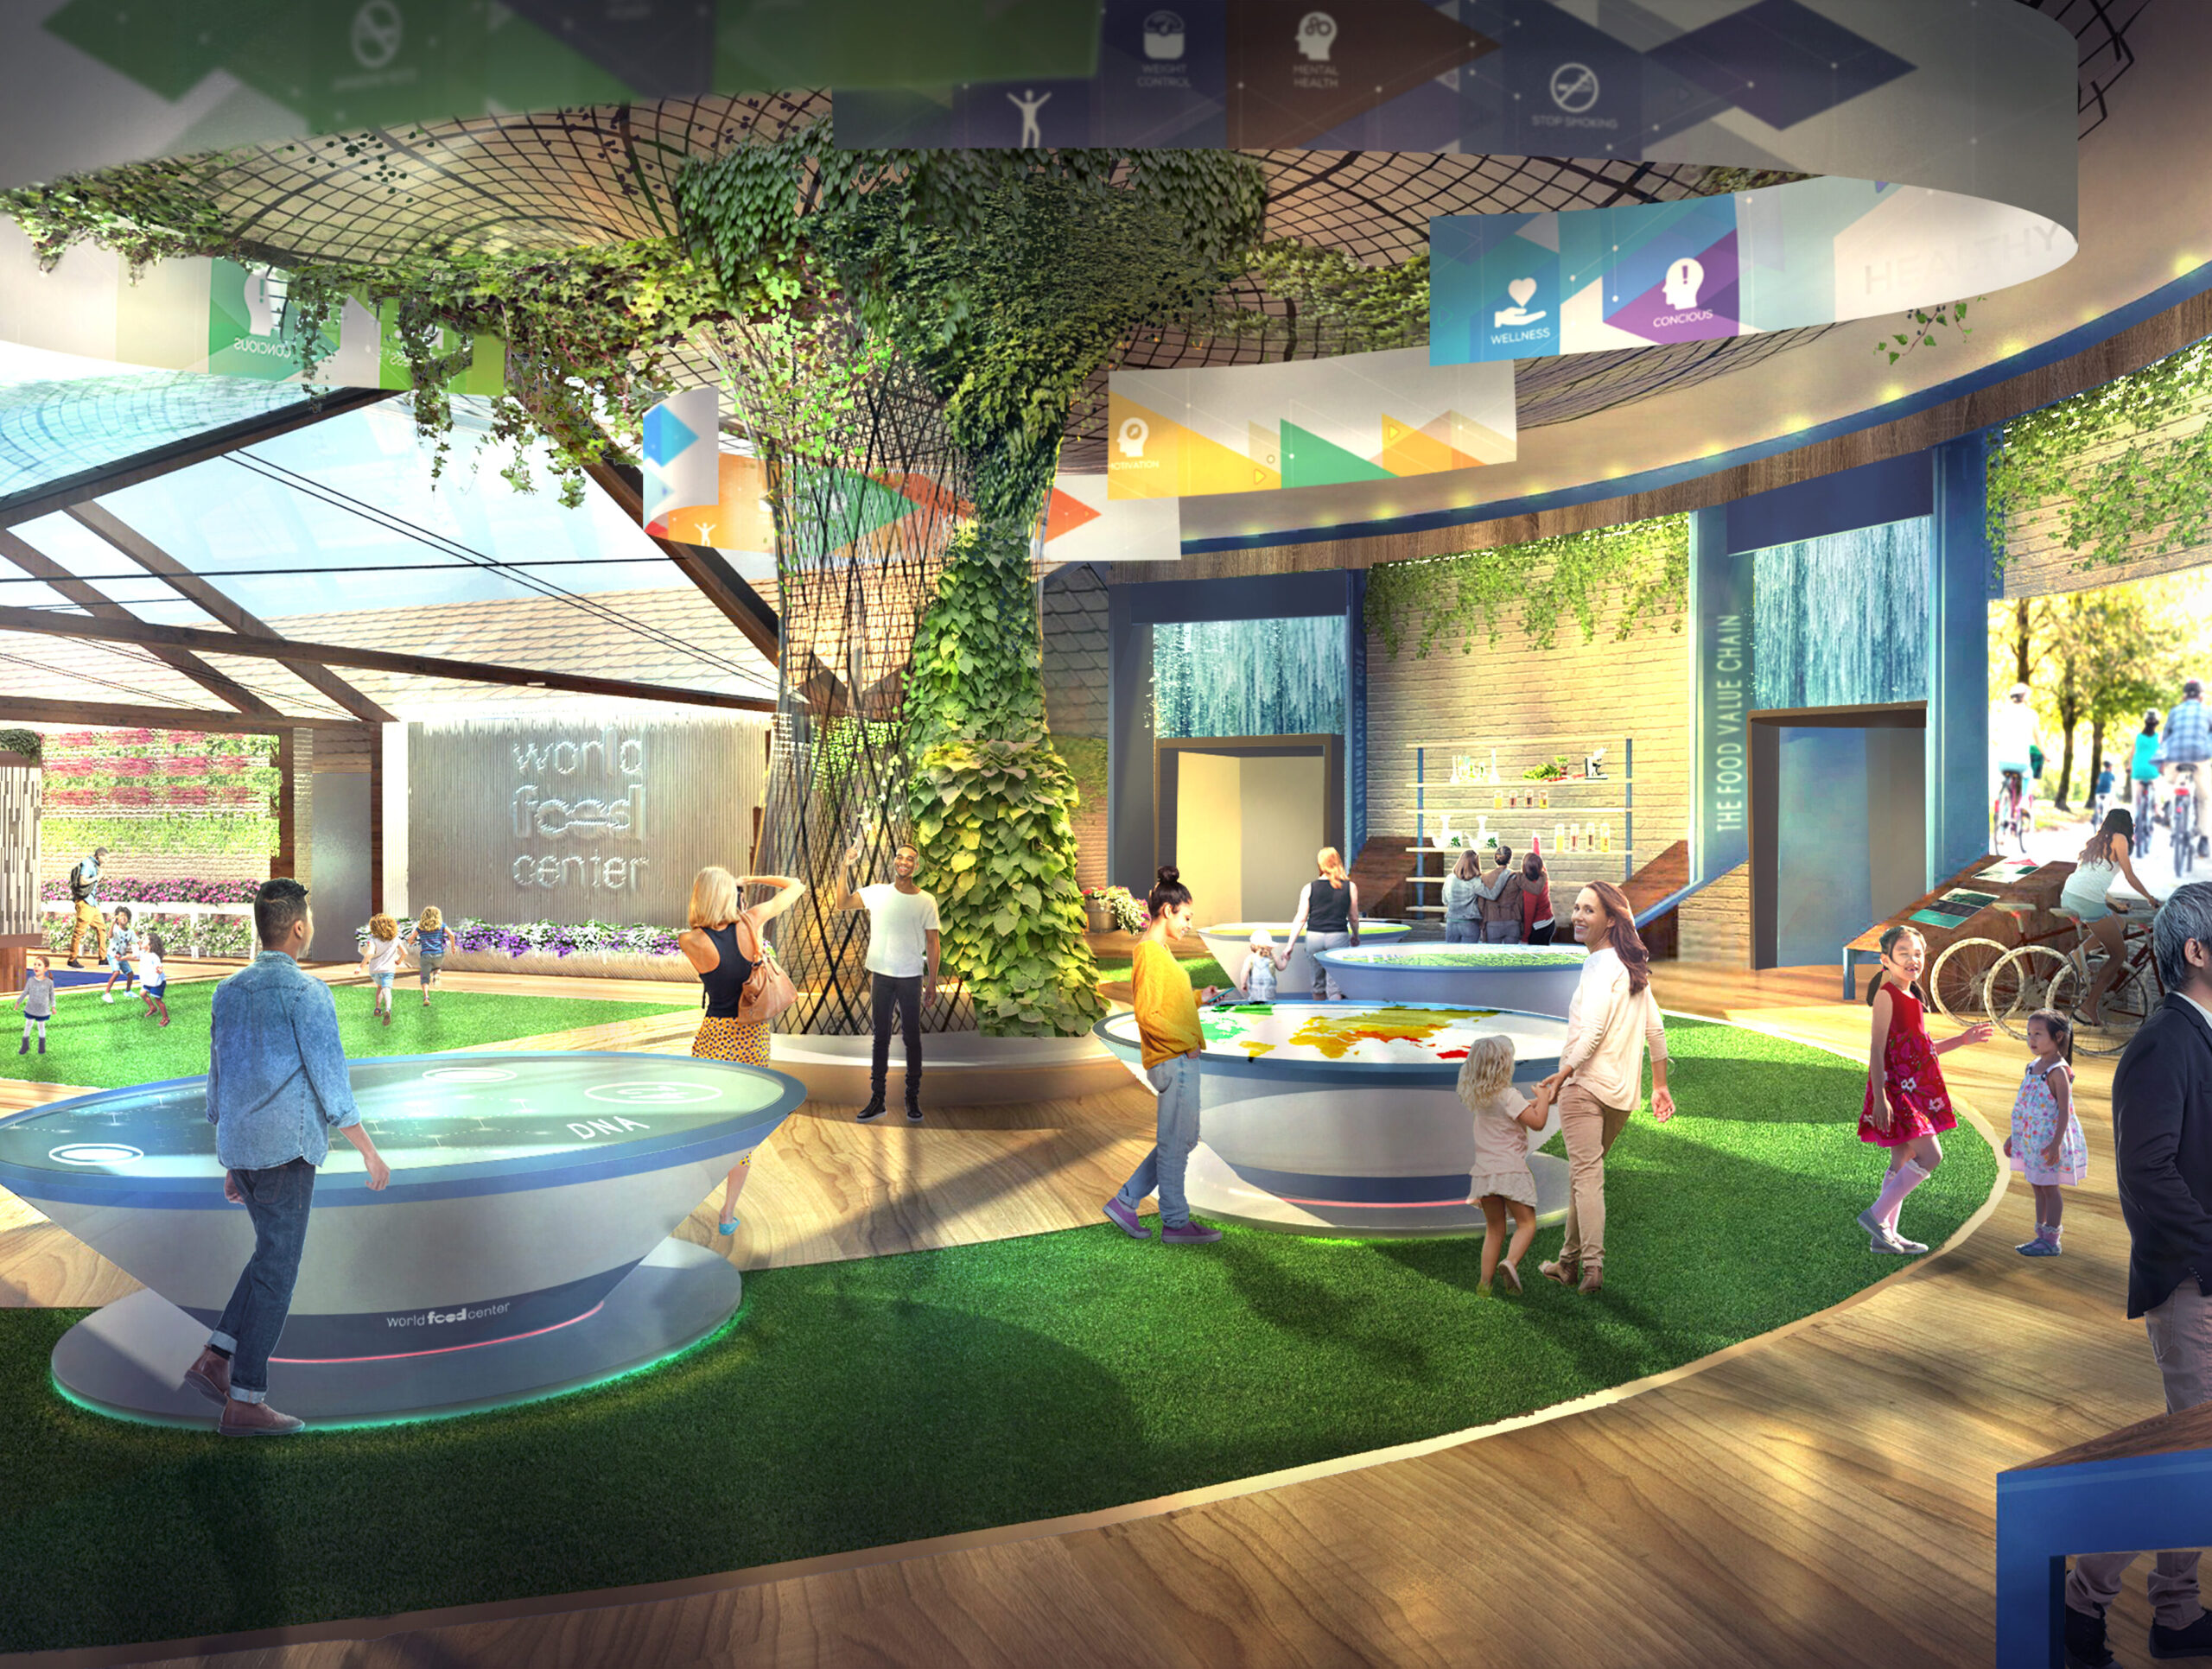 The future reception at the Experience